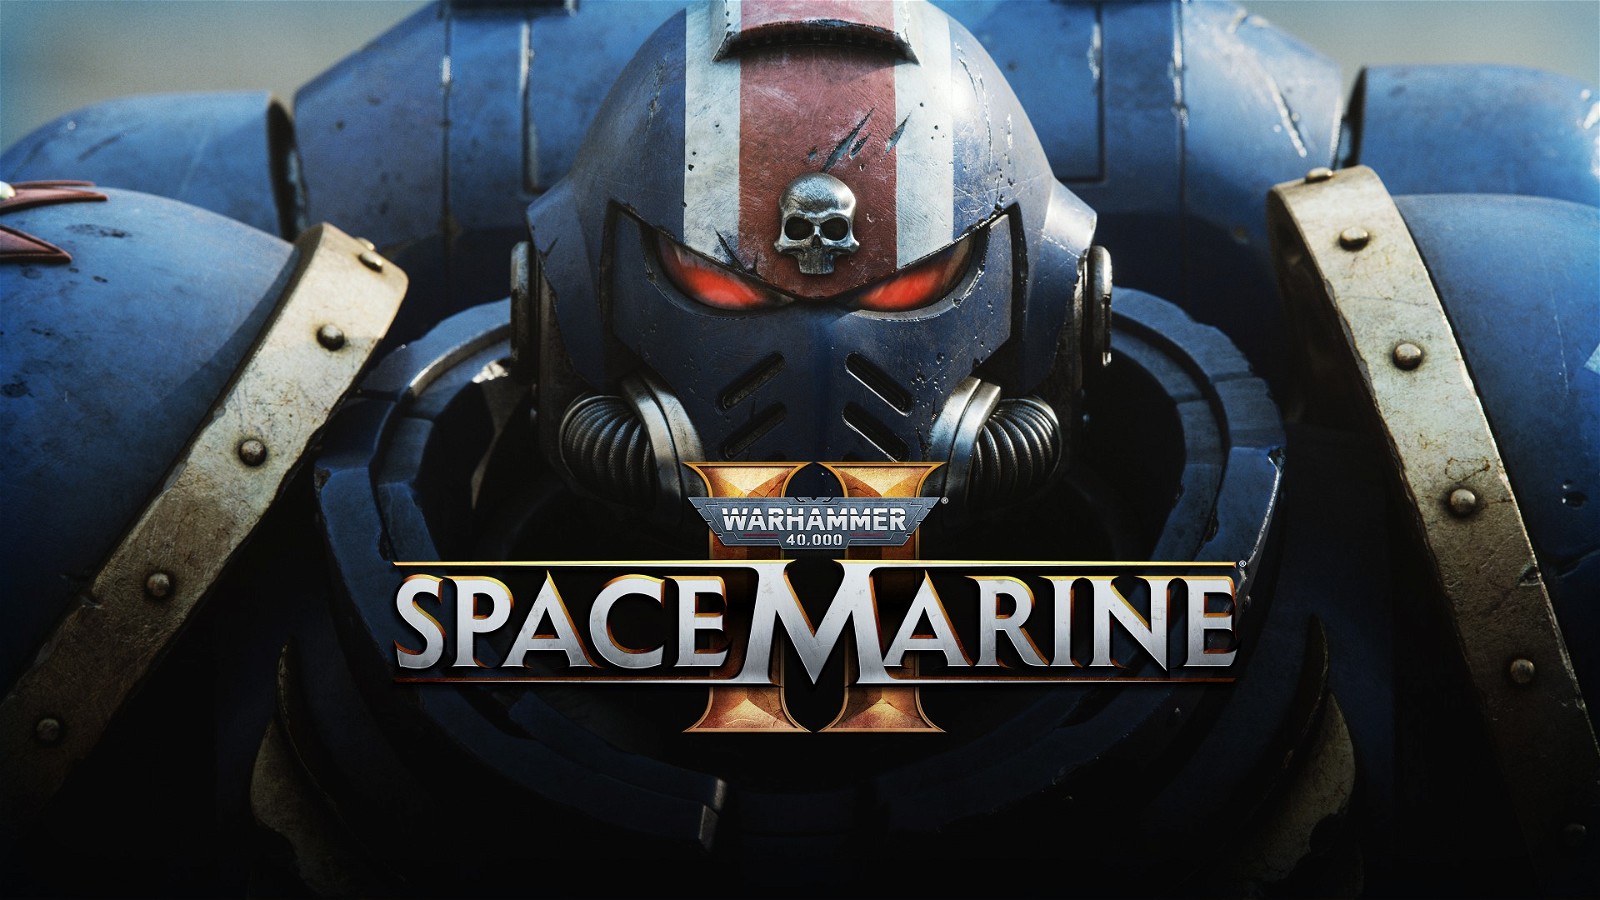 Space Marine 2 Has Been Set Up For Success by Saber